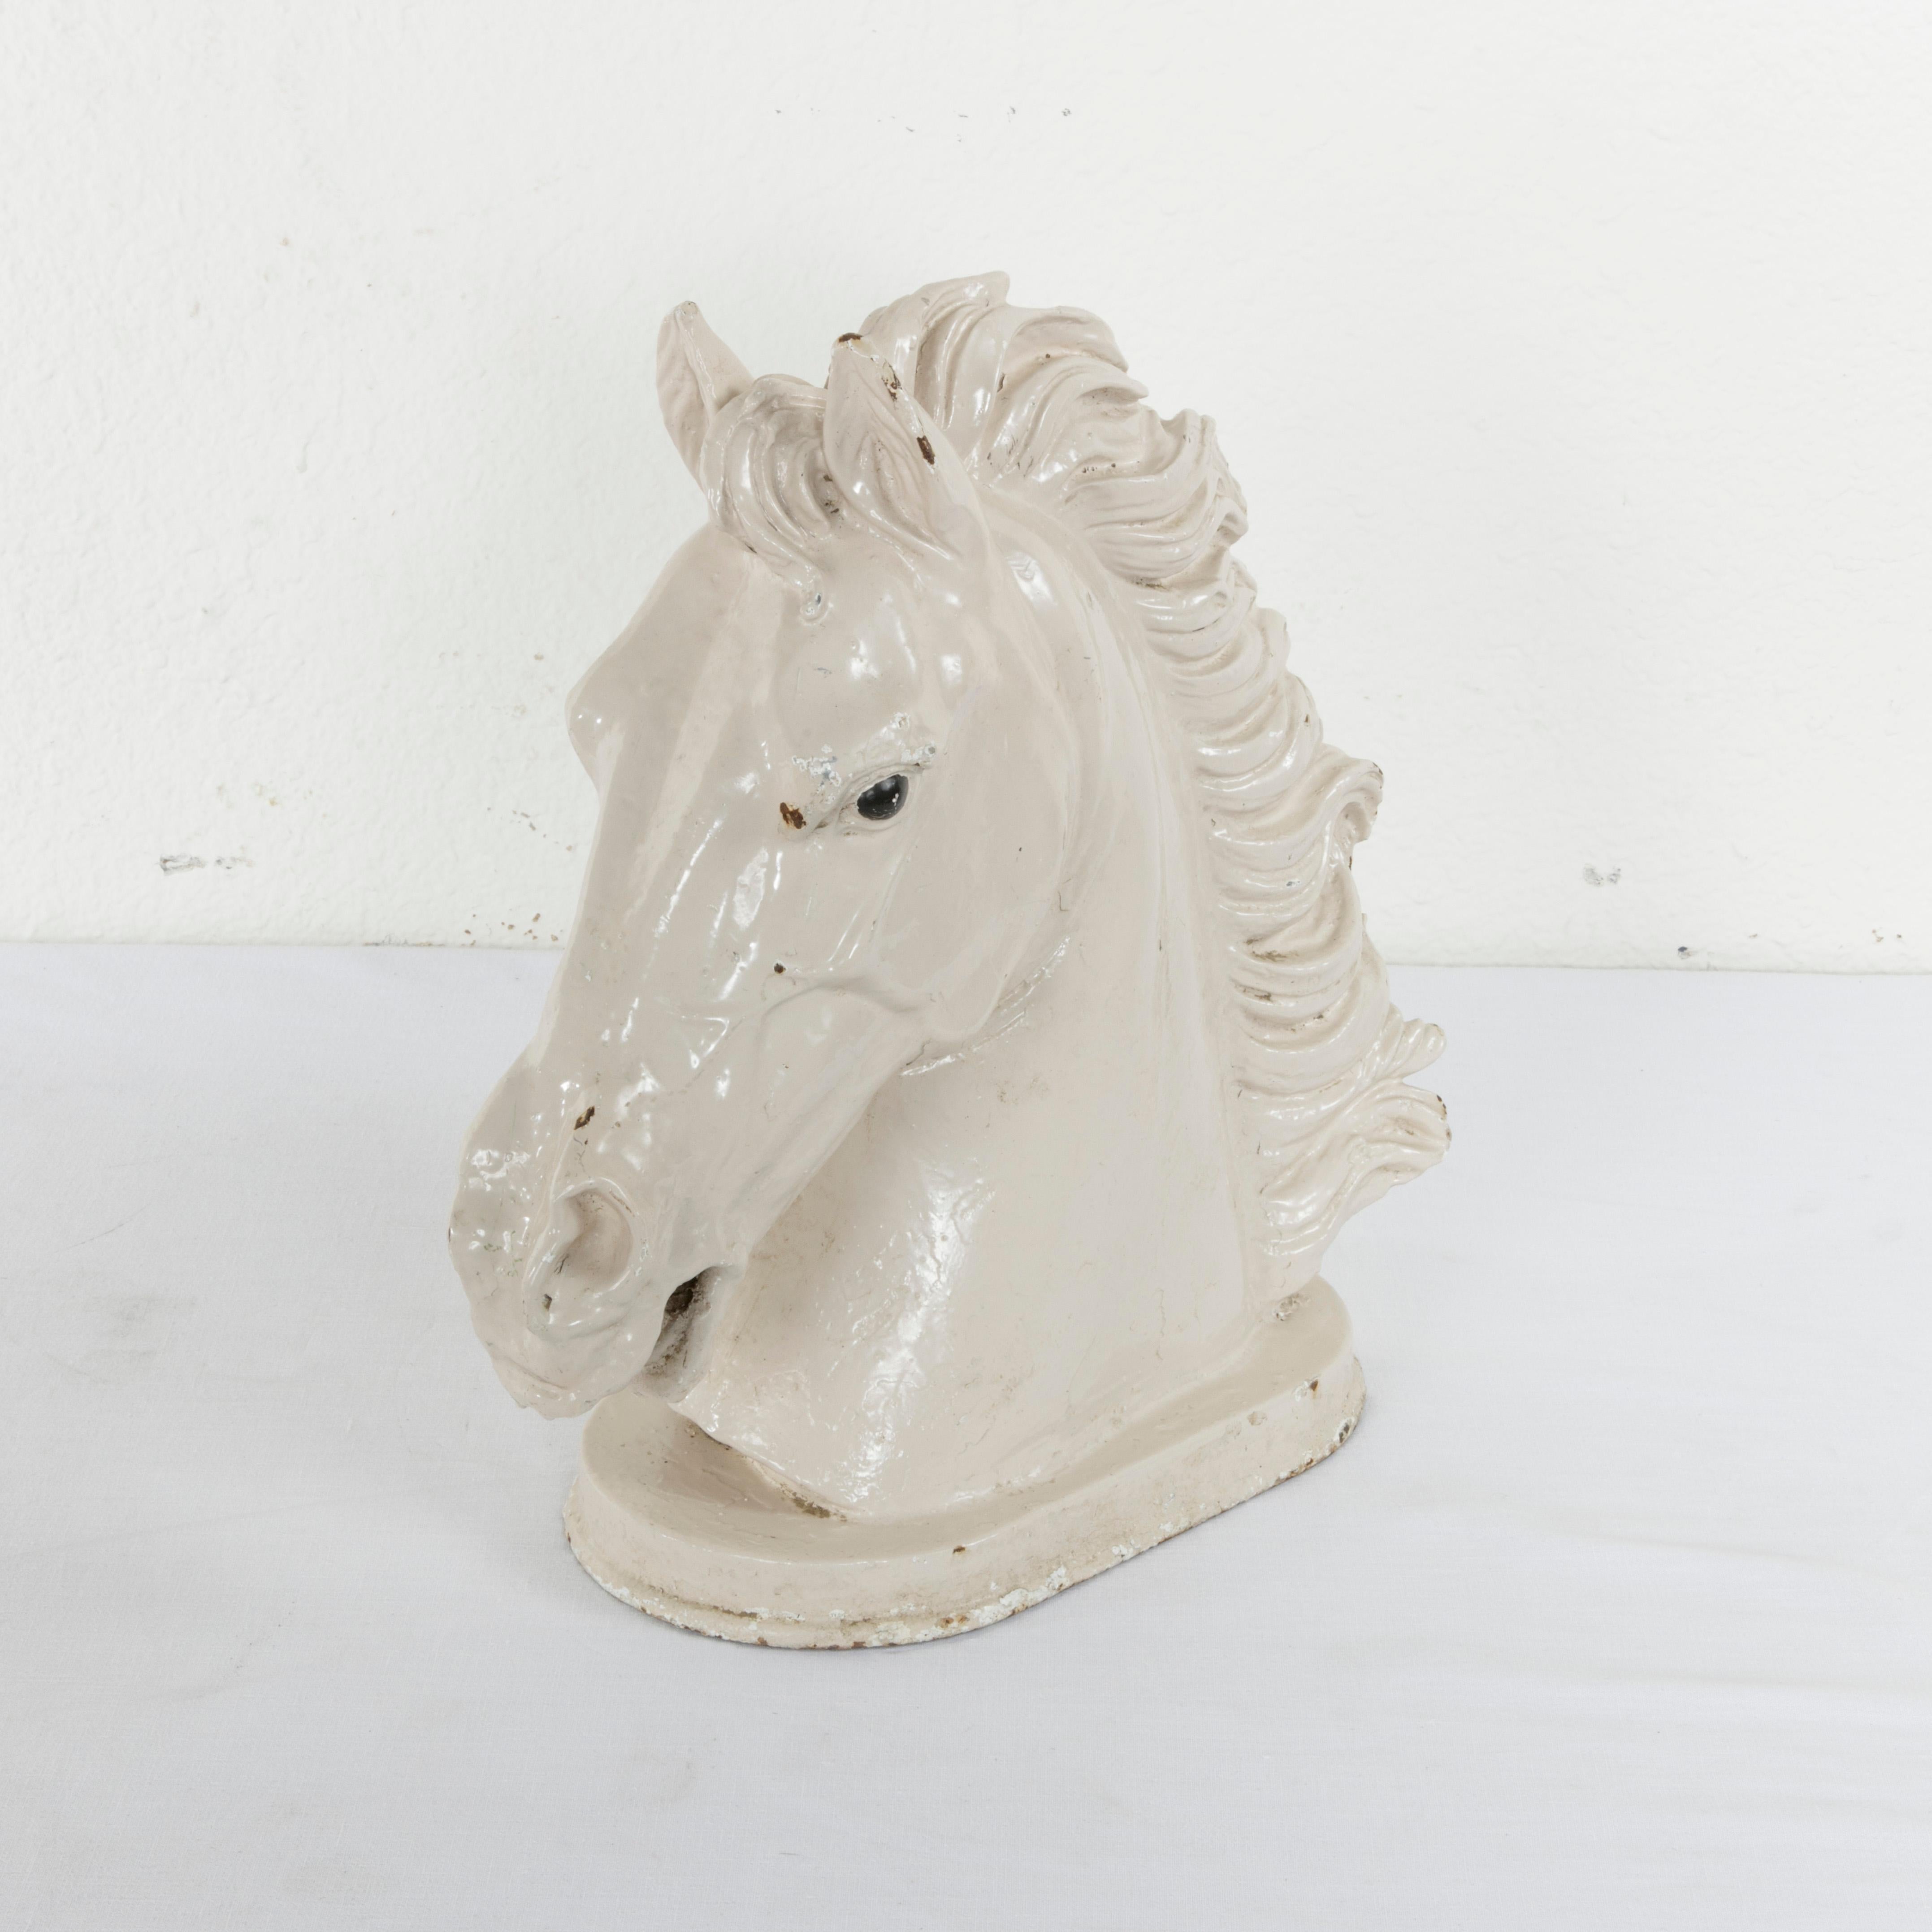 This late 19th century French cast iron bust features a horse's head with a magnificent mane. Originally mounted outside of a butcher shop that sold horse meat, this piece is enameled white, and the eyes are detailed in black. Standing at nearly 15